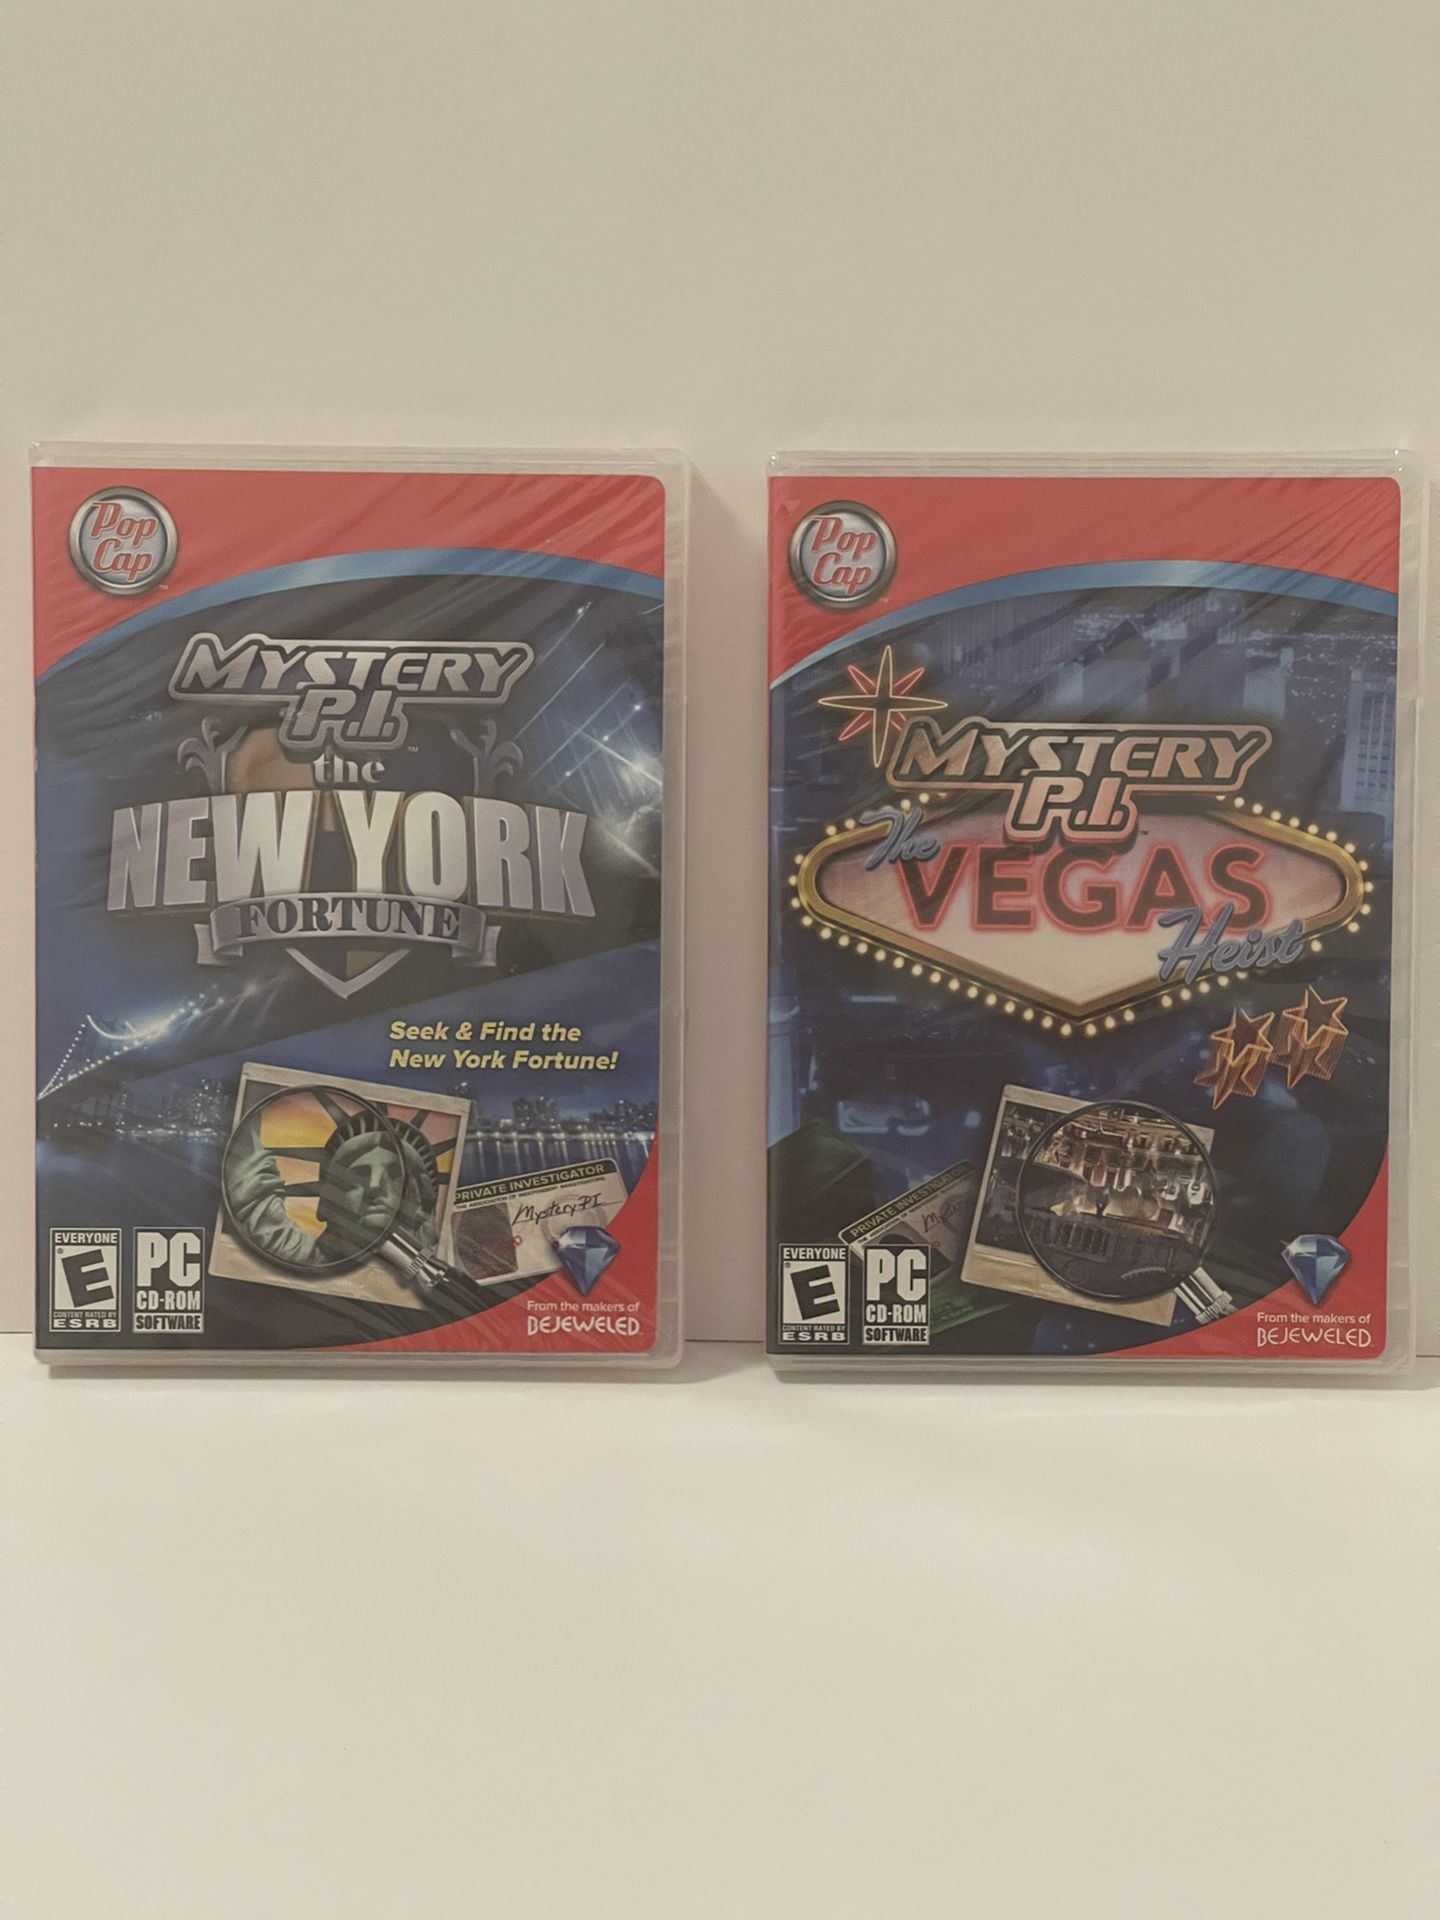 2 pop cap pc games New/Sealed Mystery P.I the New York fortune and the Vegas heist 